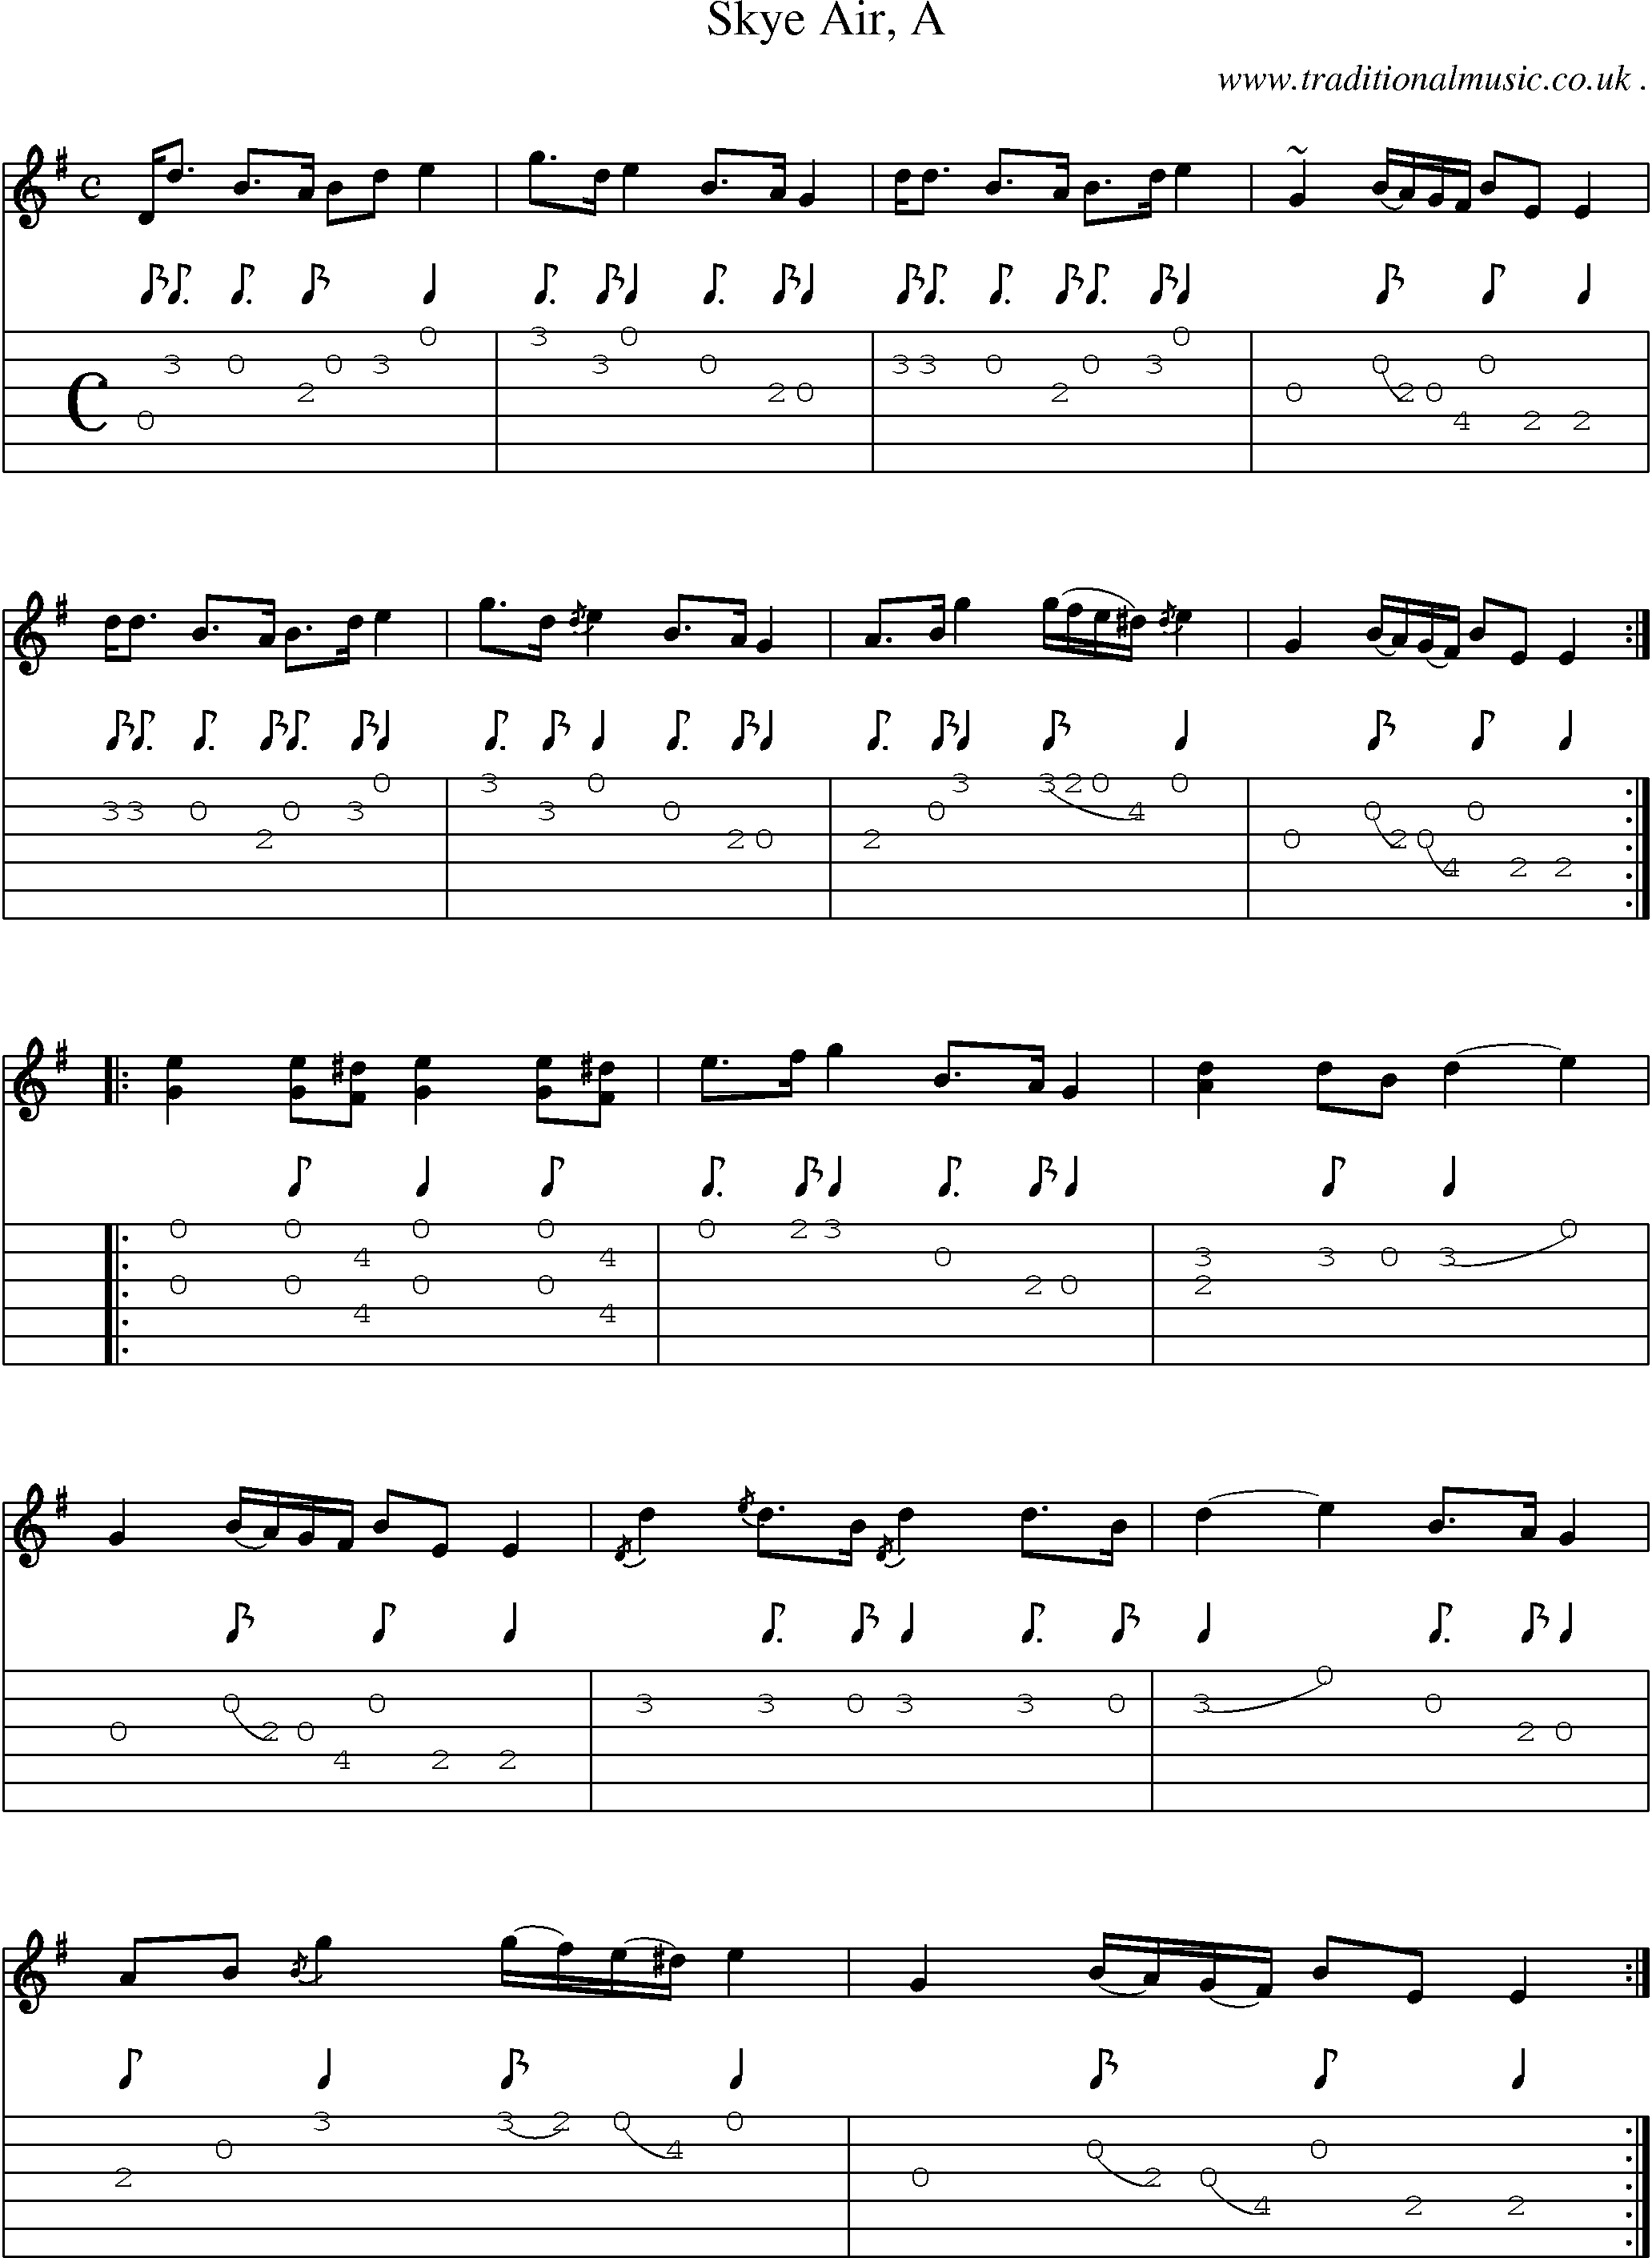 Sheet-music  score, Chords and Guitar Tabs for Skye Air A